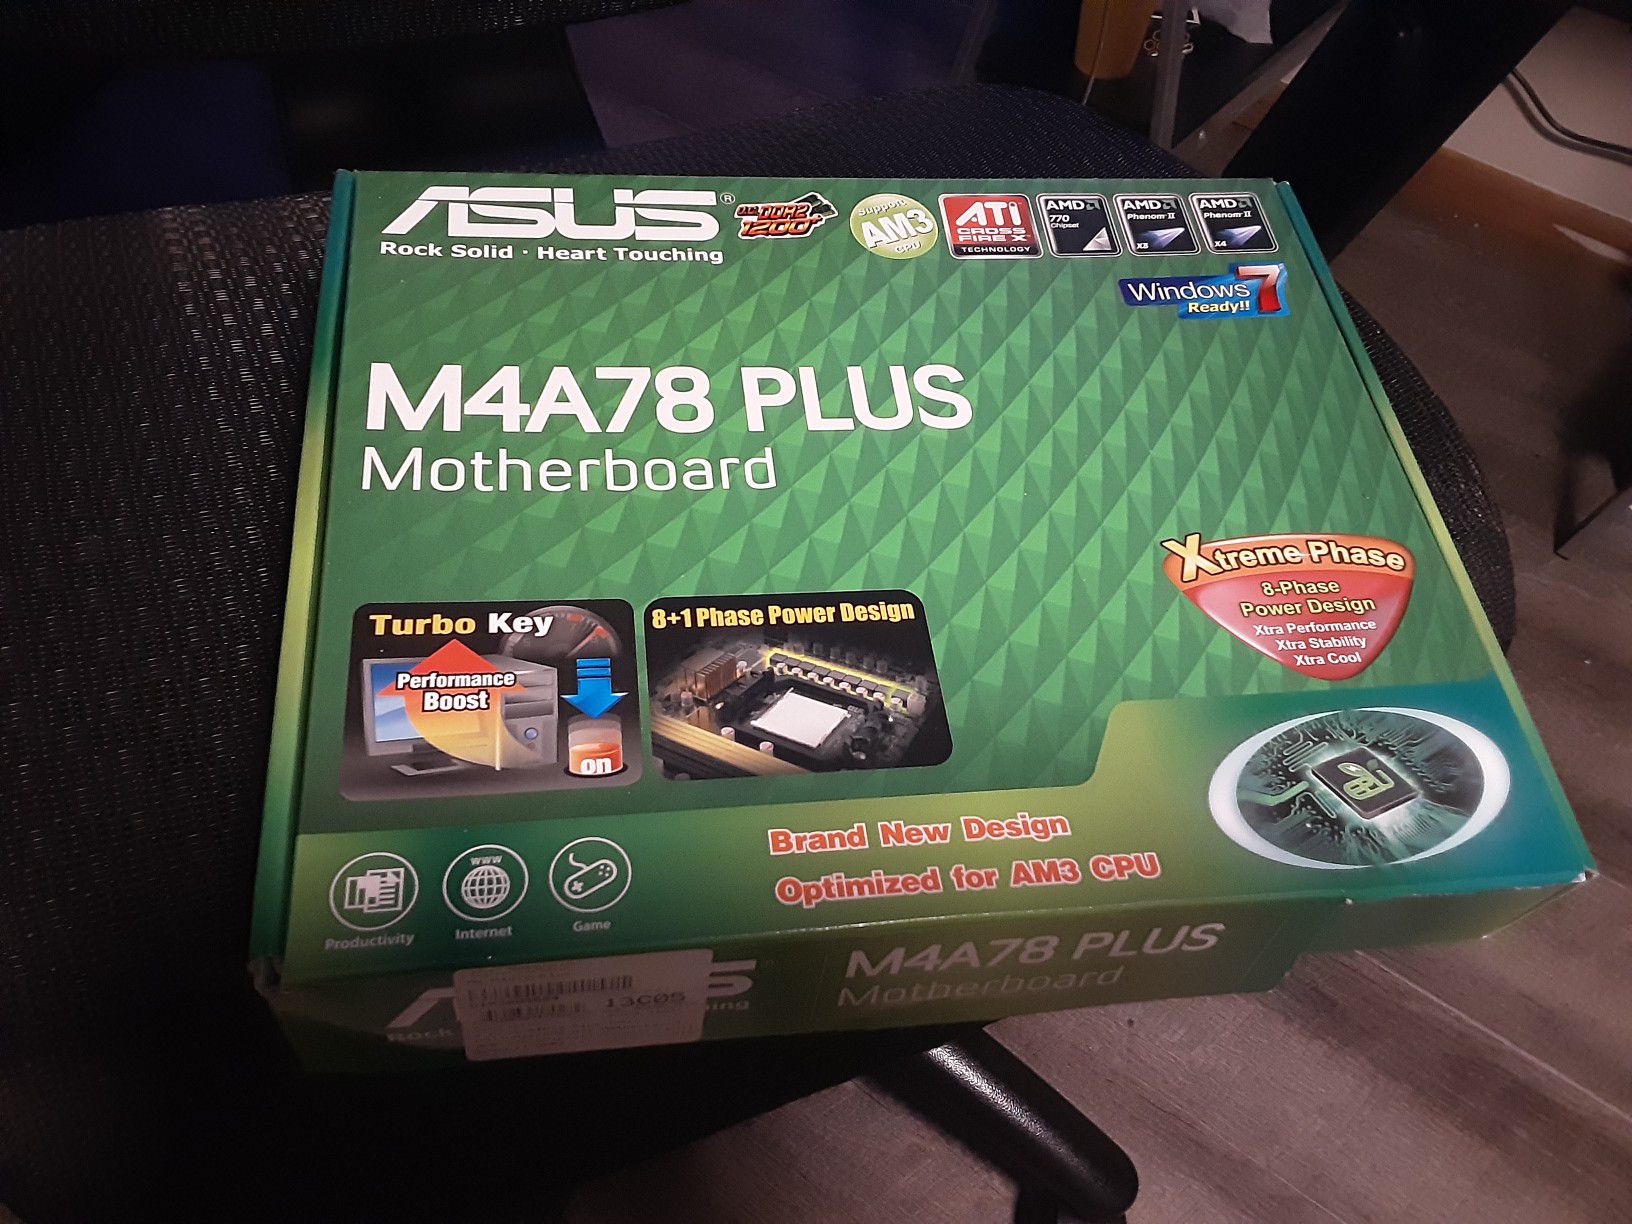 ASUS M4A78 Plus Motherboard